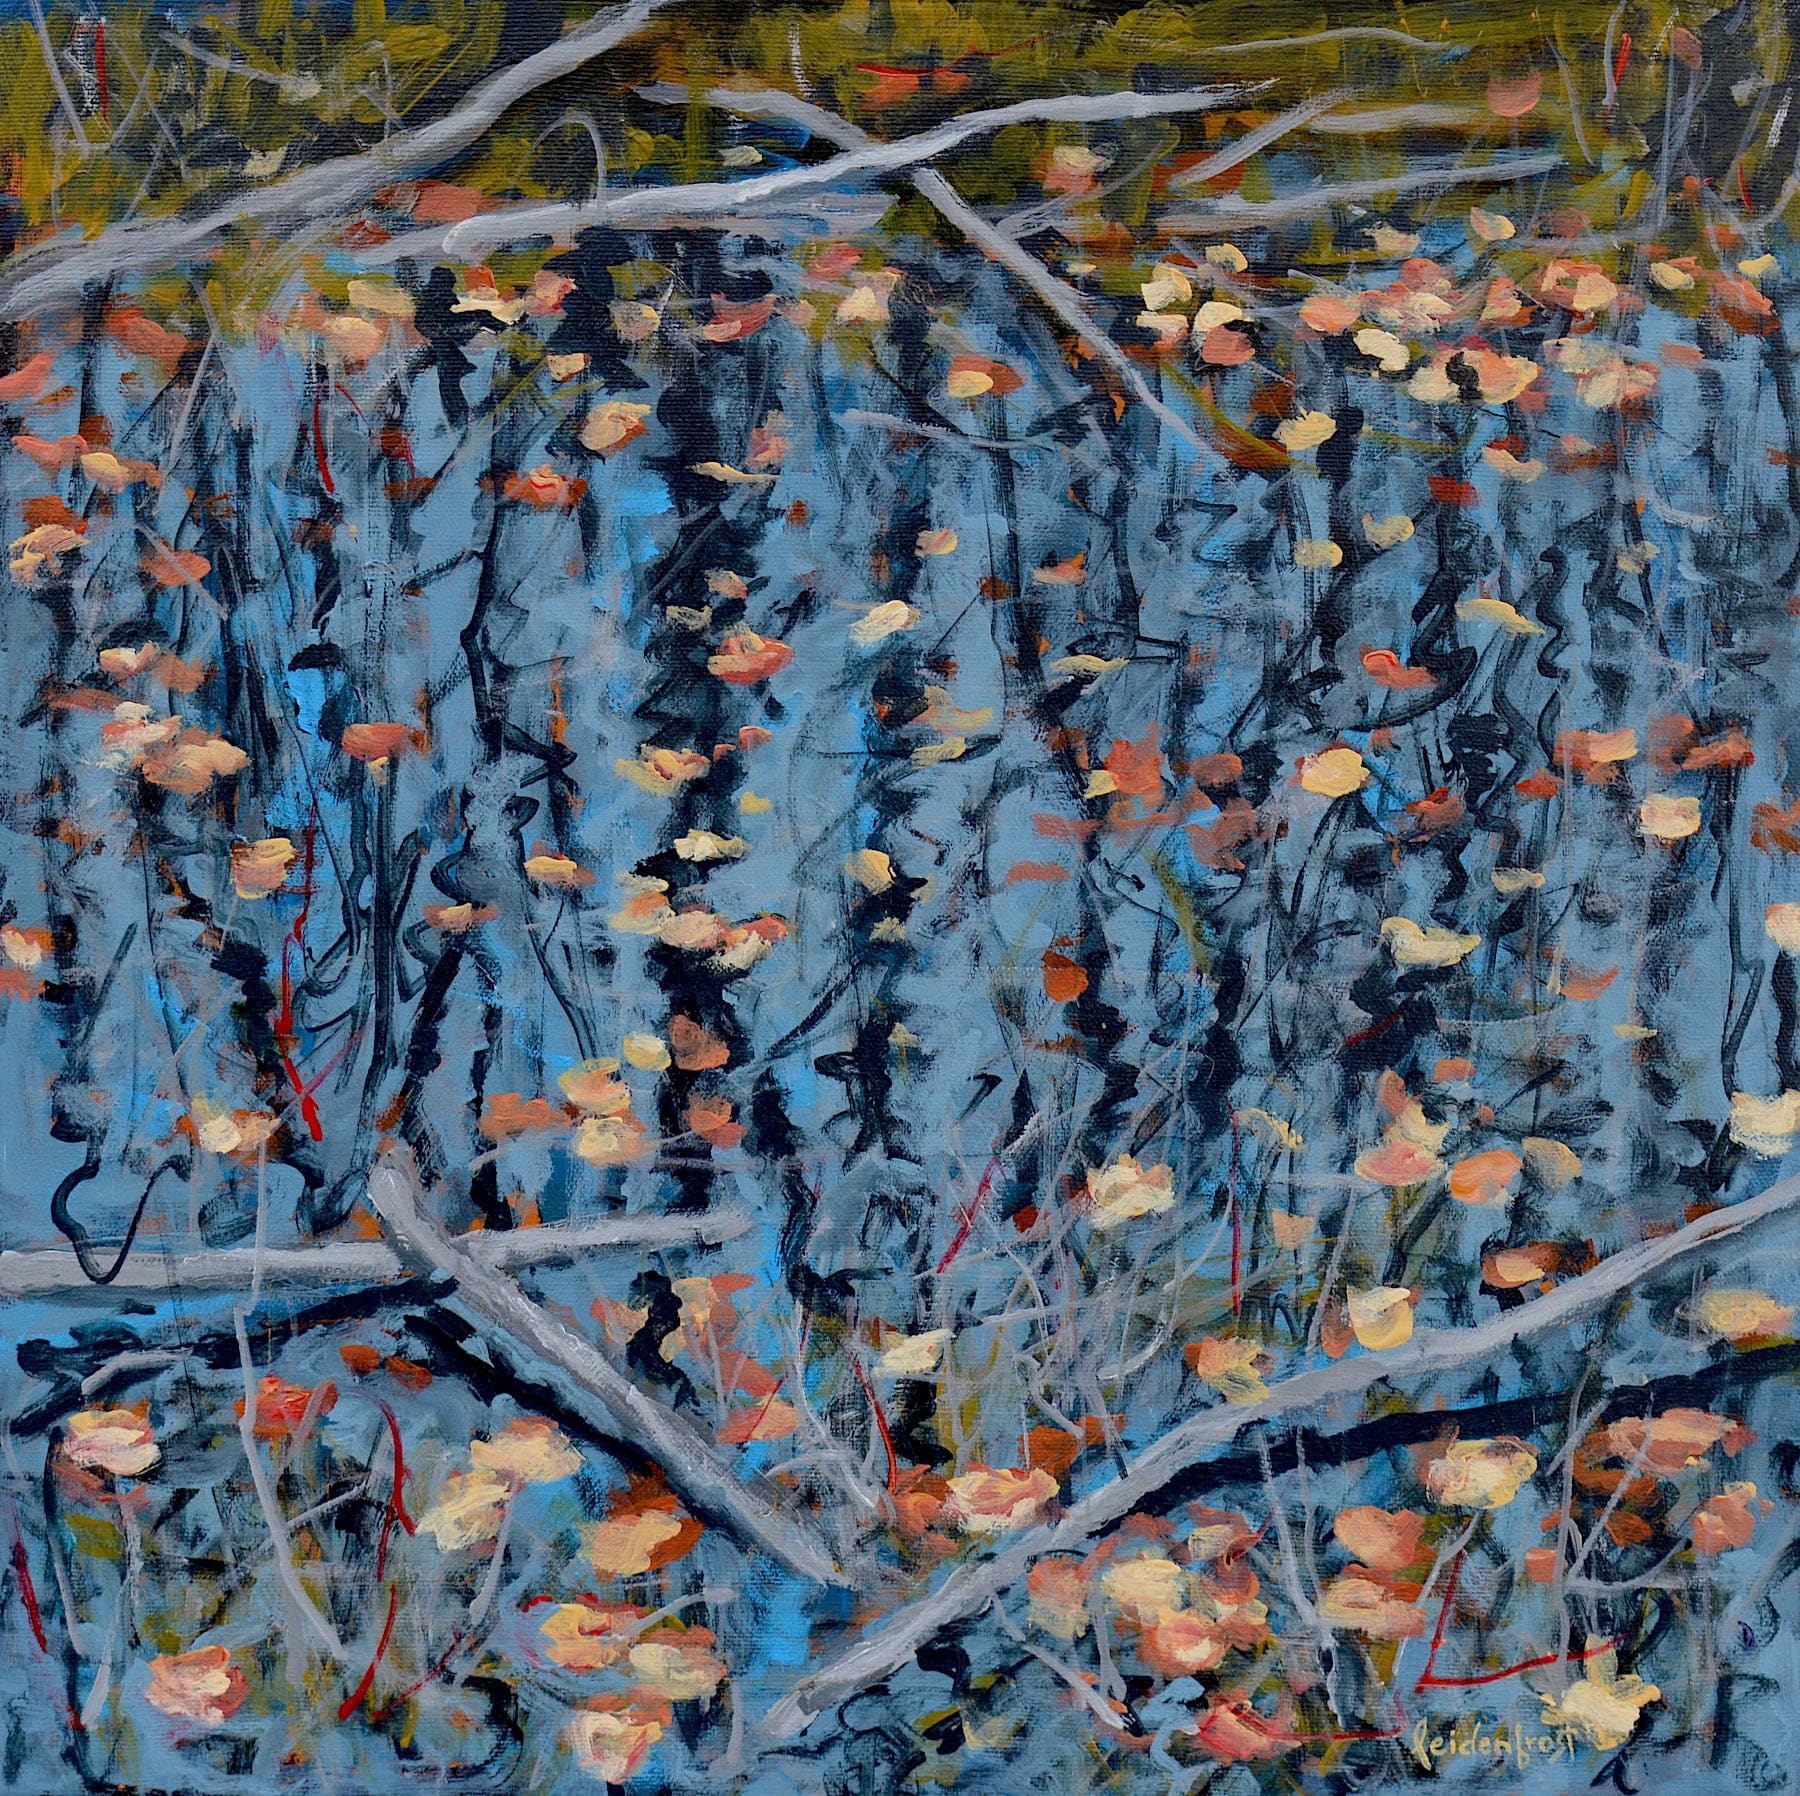 Wayne Leidenfrost painting After the Fall (Study) Art Works Gallery